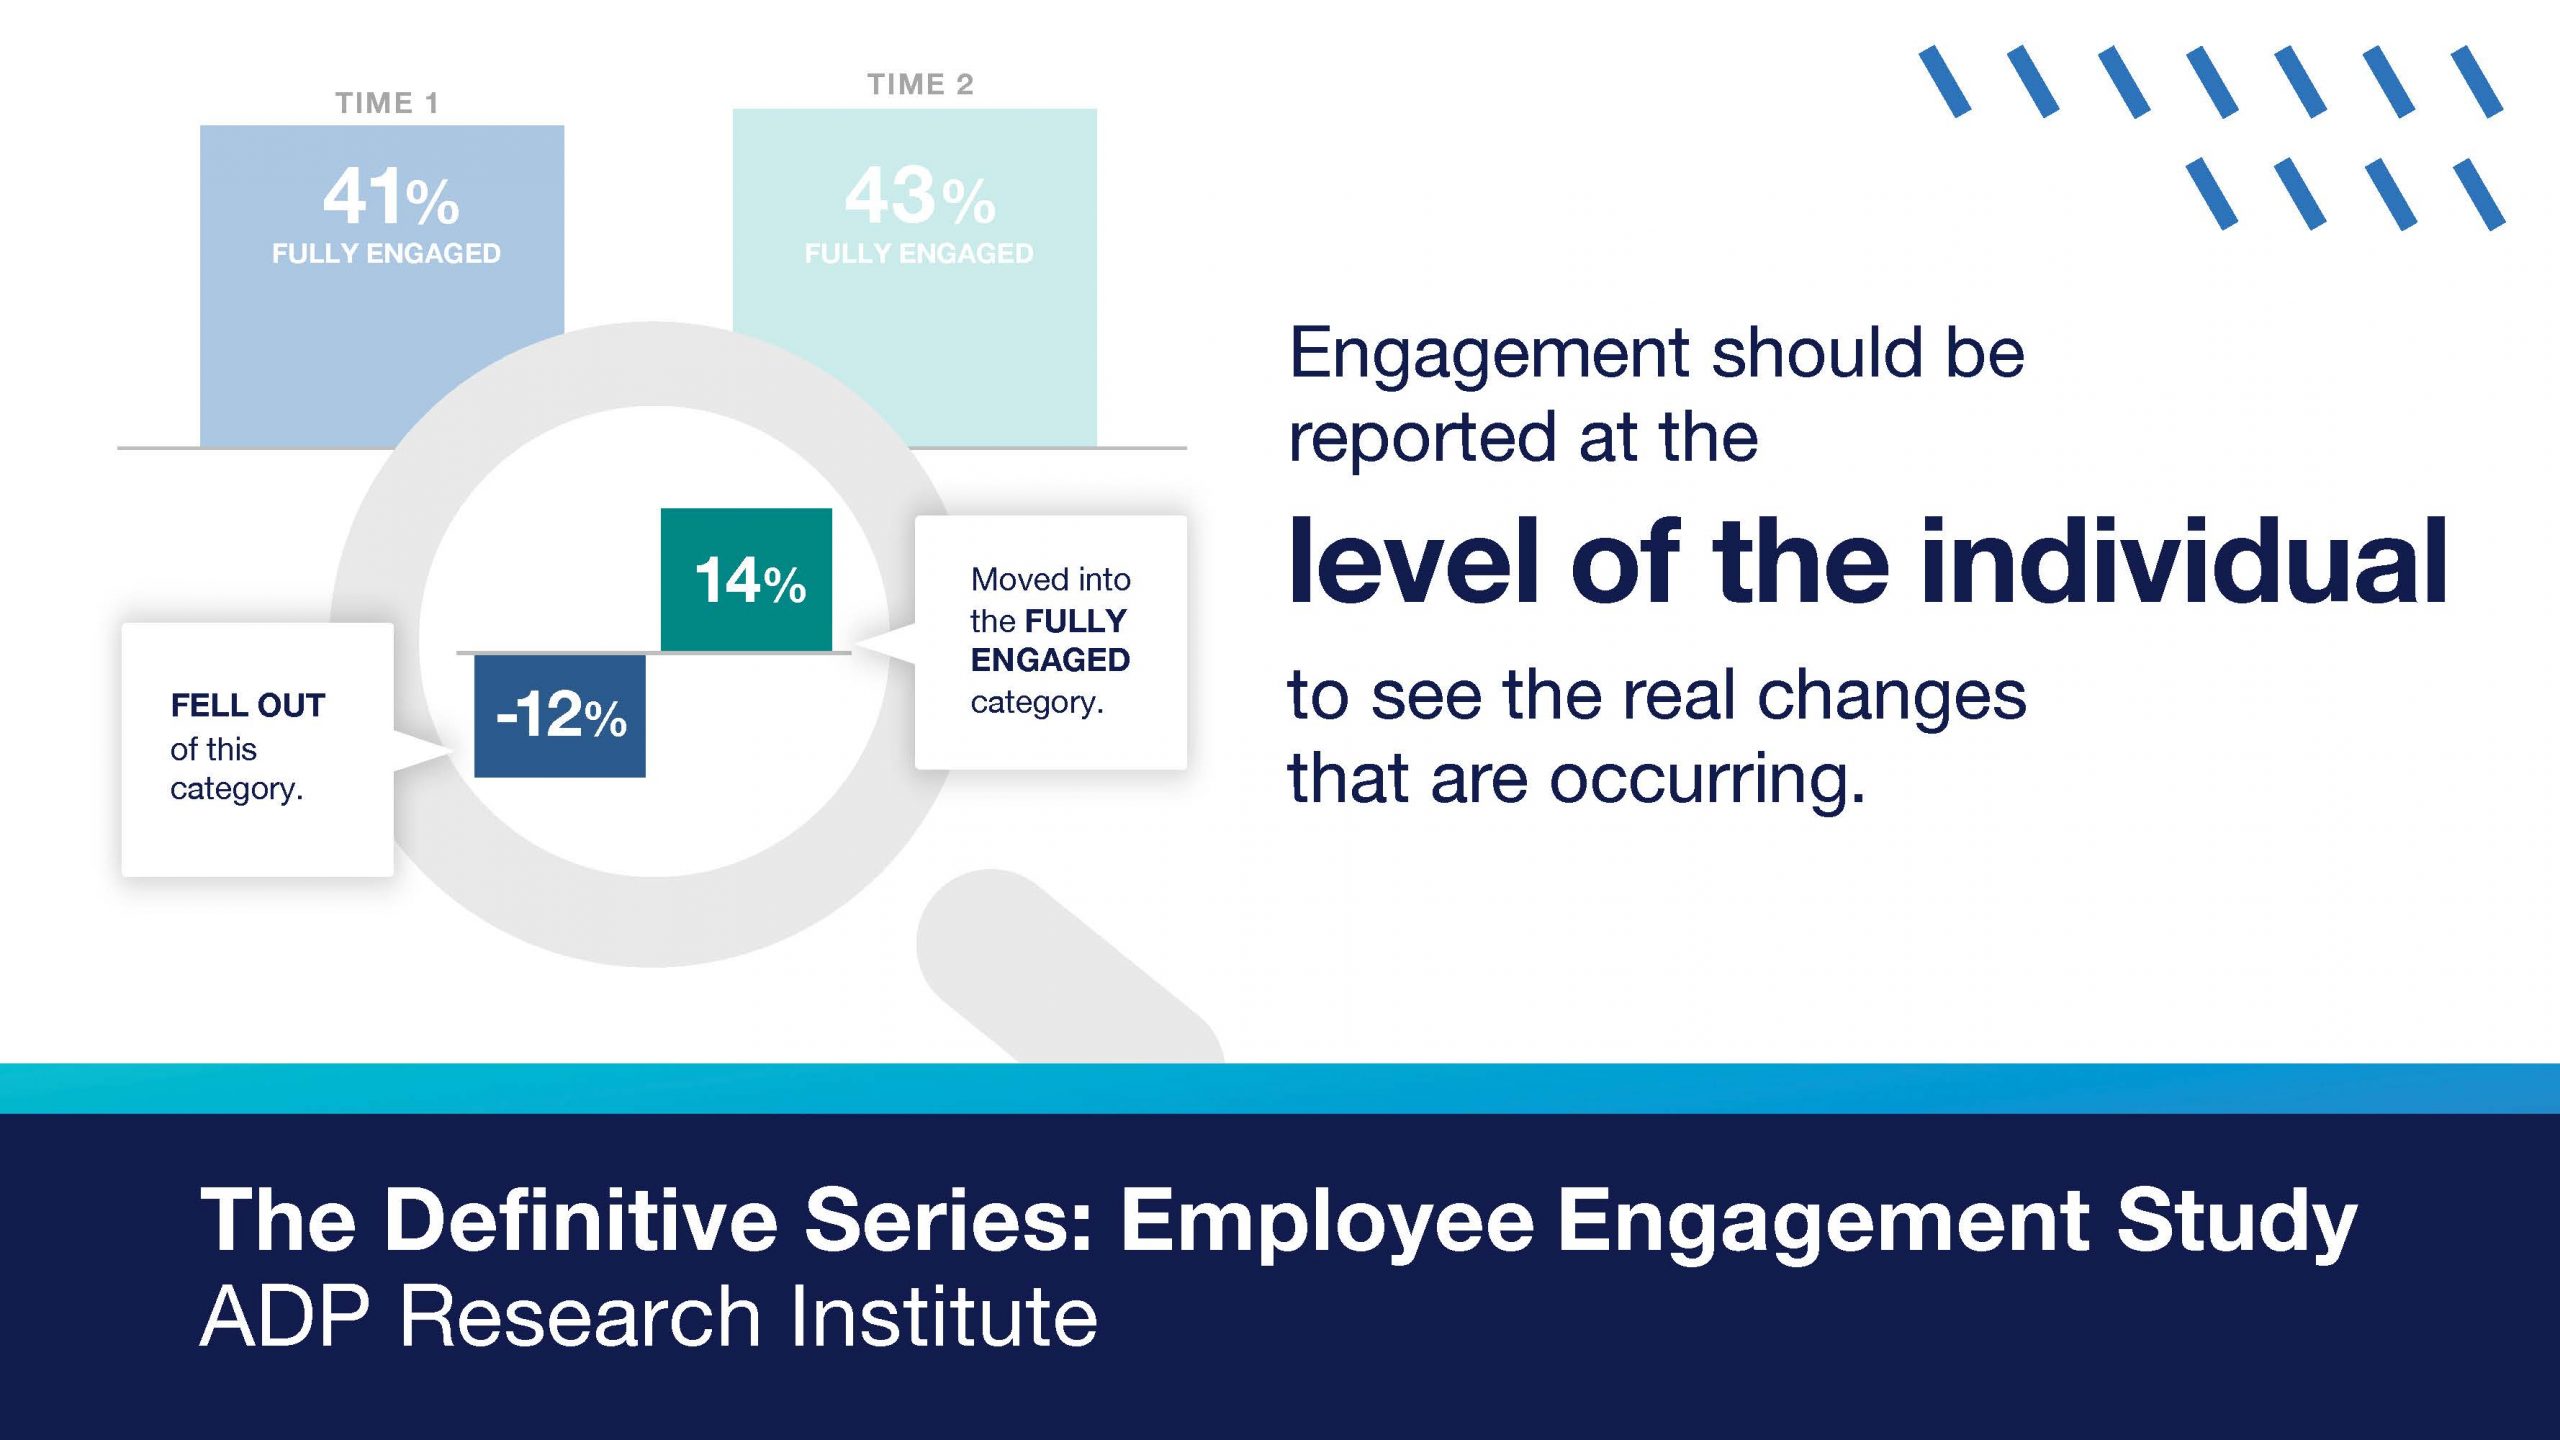 statistic Engagement should be reported at the level of the individual to see the real changes that are occurring.